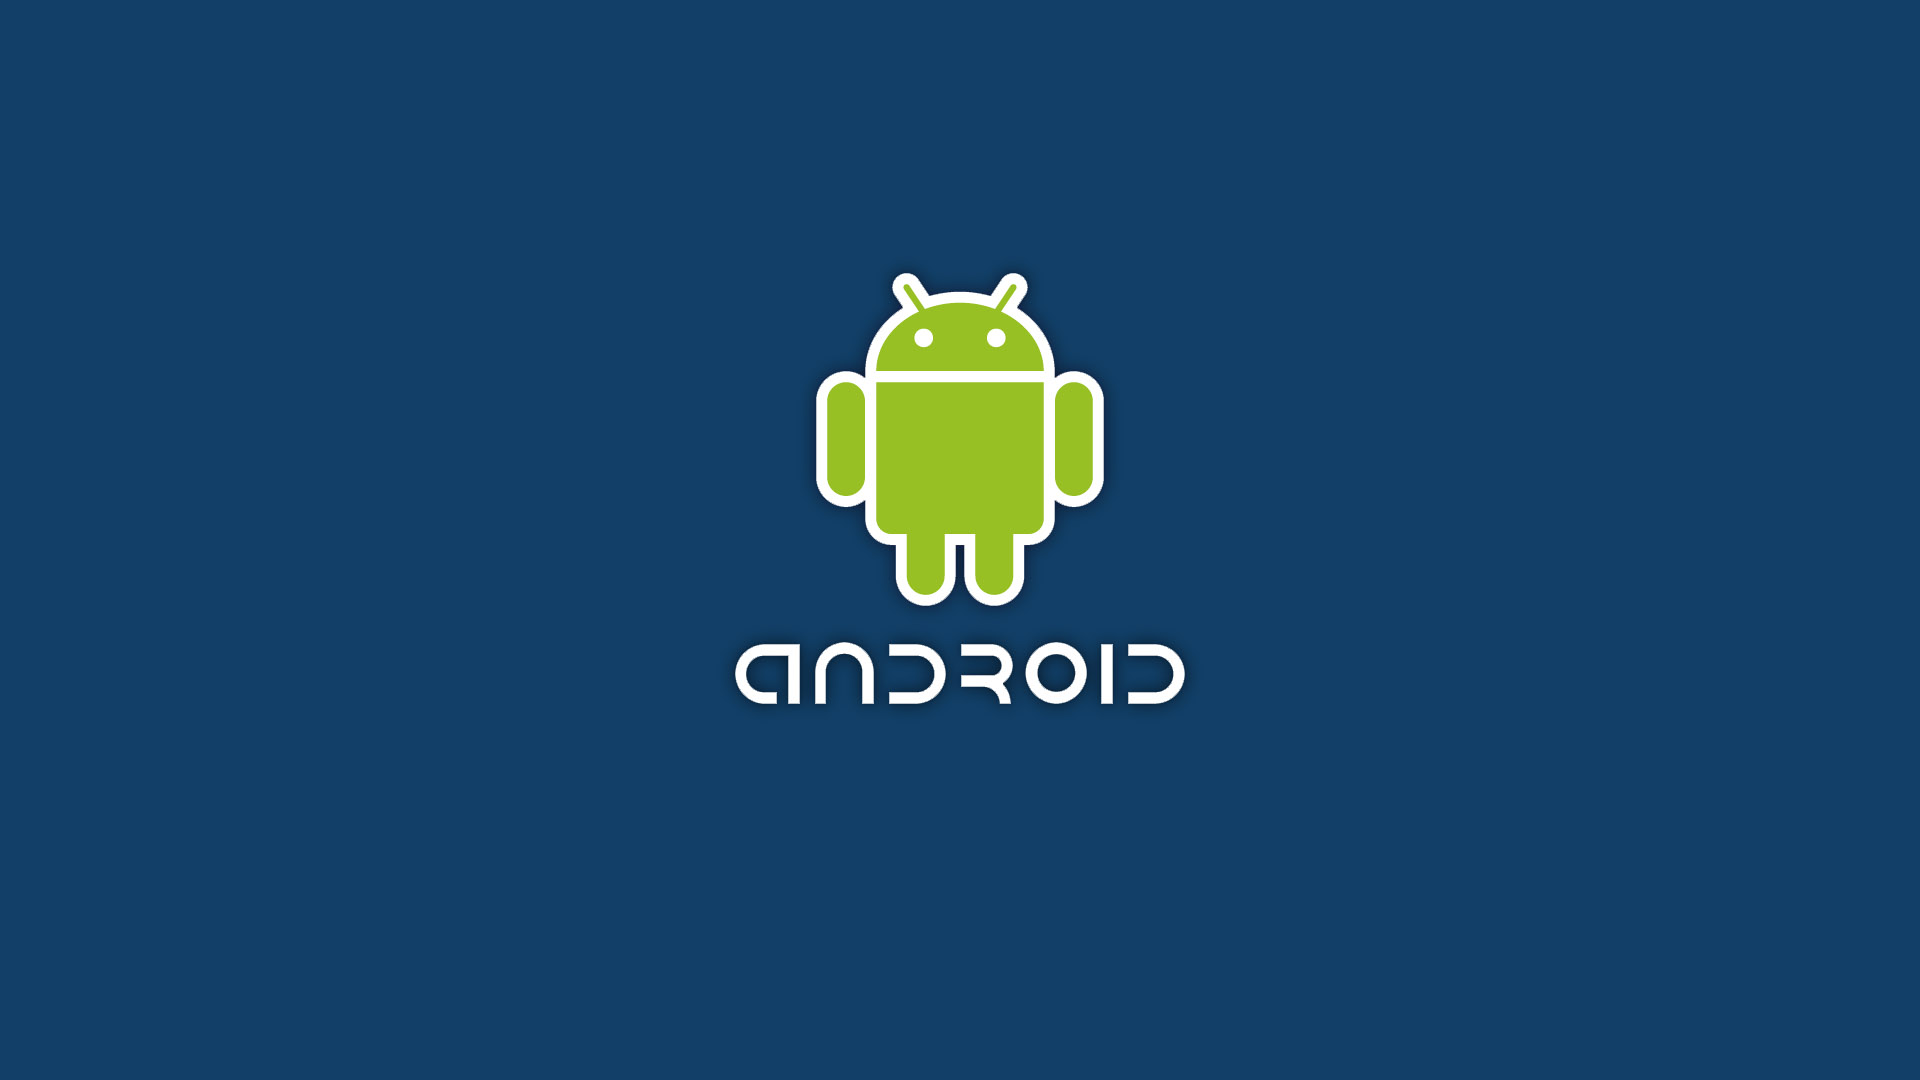 Android Logo on Blue Background Wallpaper for Nokia Asha 501 1920x1080